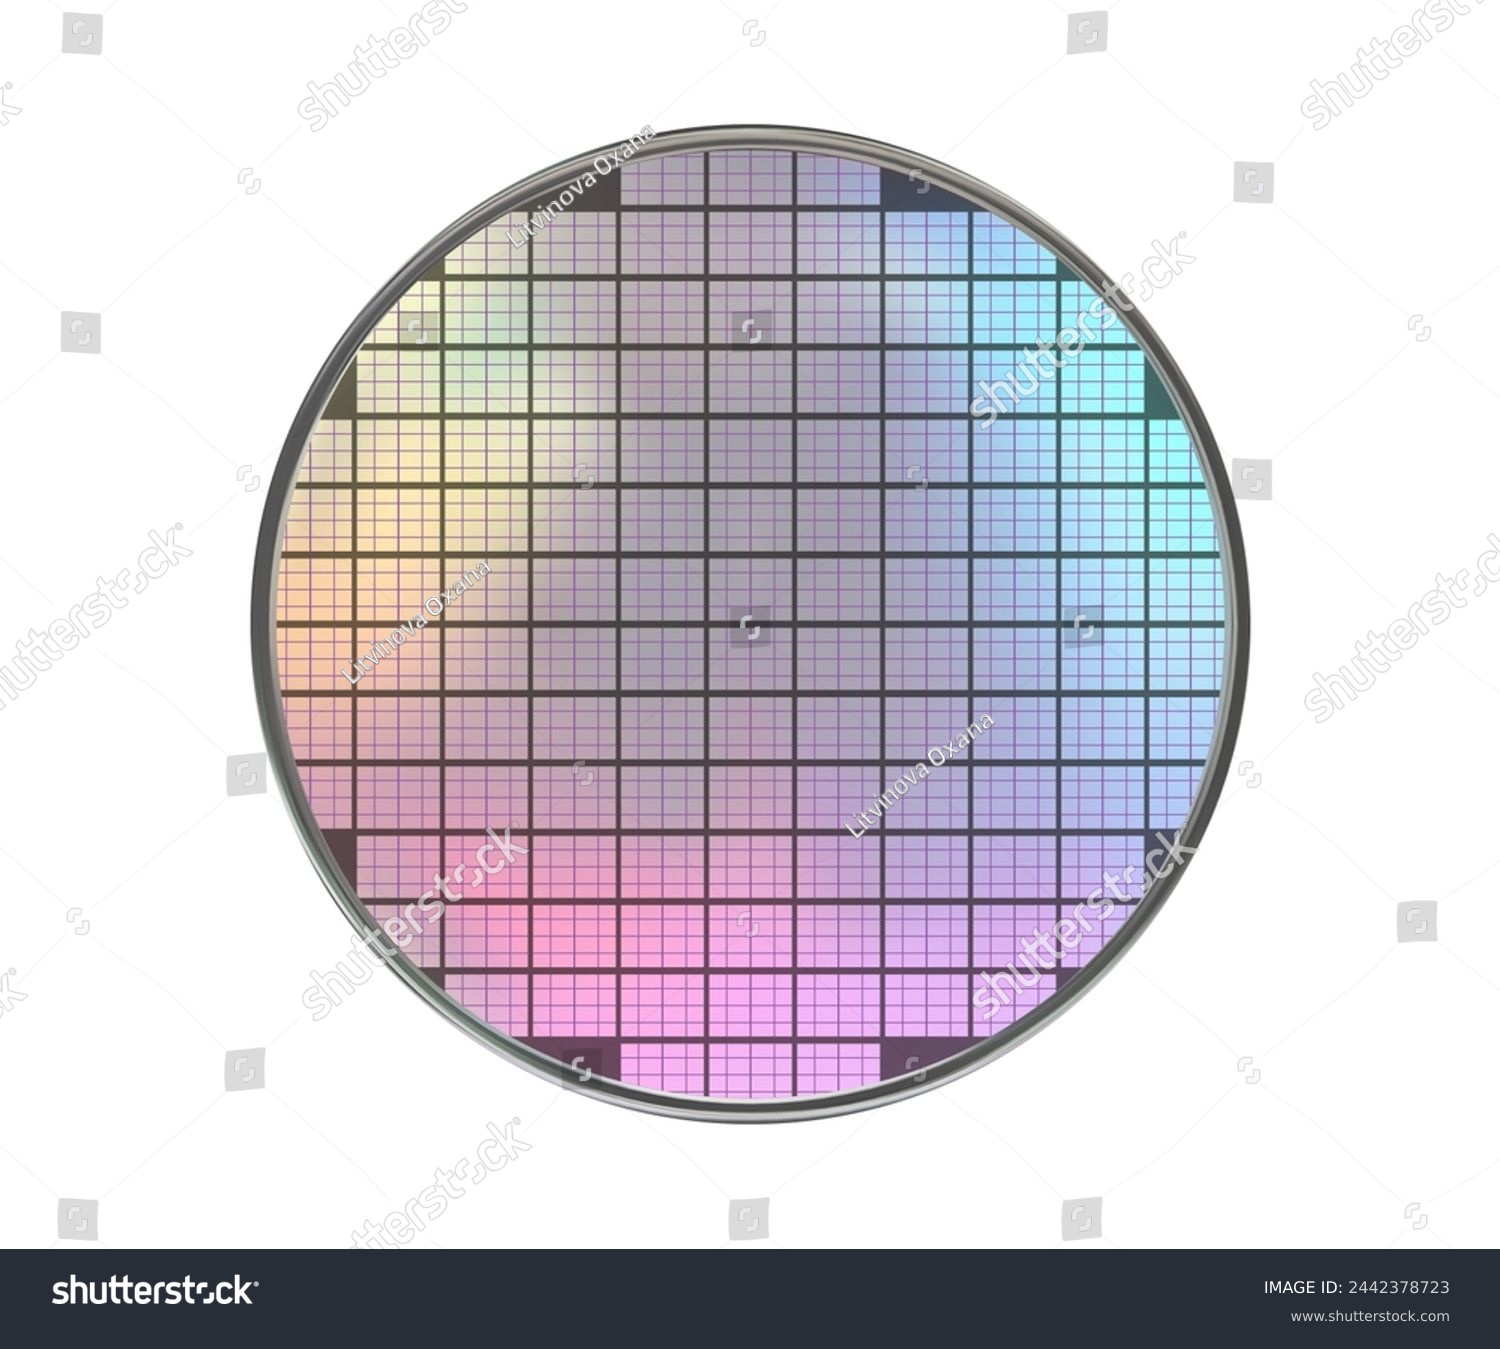 SVG of Polycrystalline silicon wafer with microchips isolated on white. Microelectronic device for the fabrication of integrated circuits. SIM computer chips. Vector illustration with gradient mesh svg